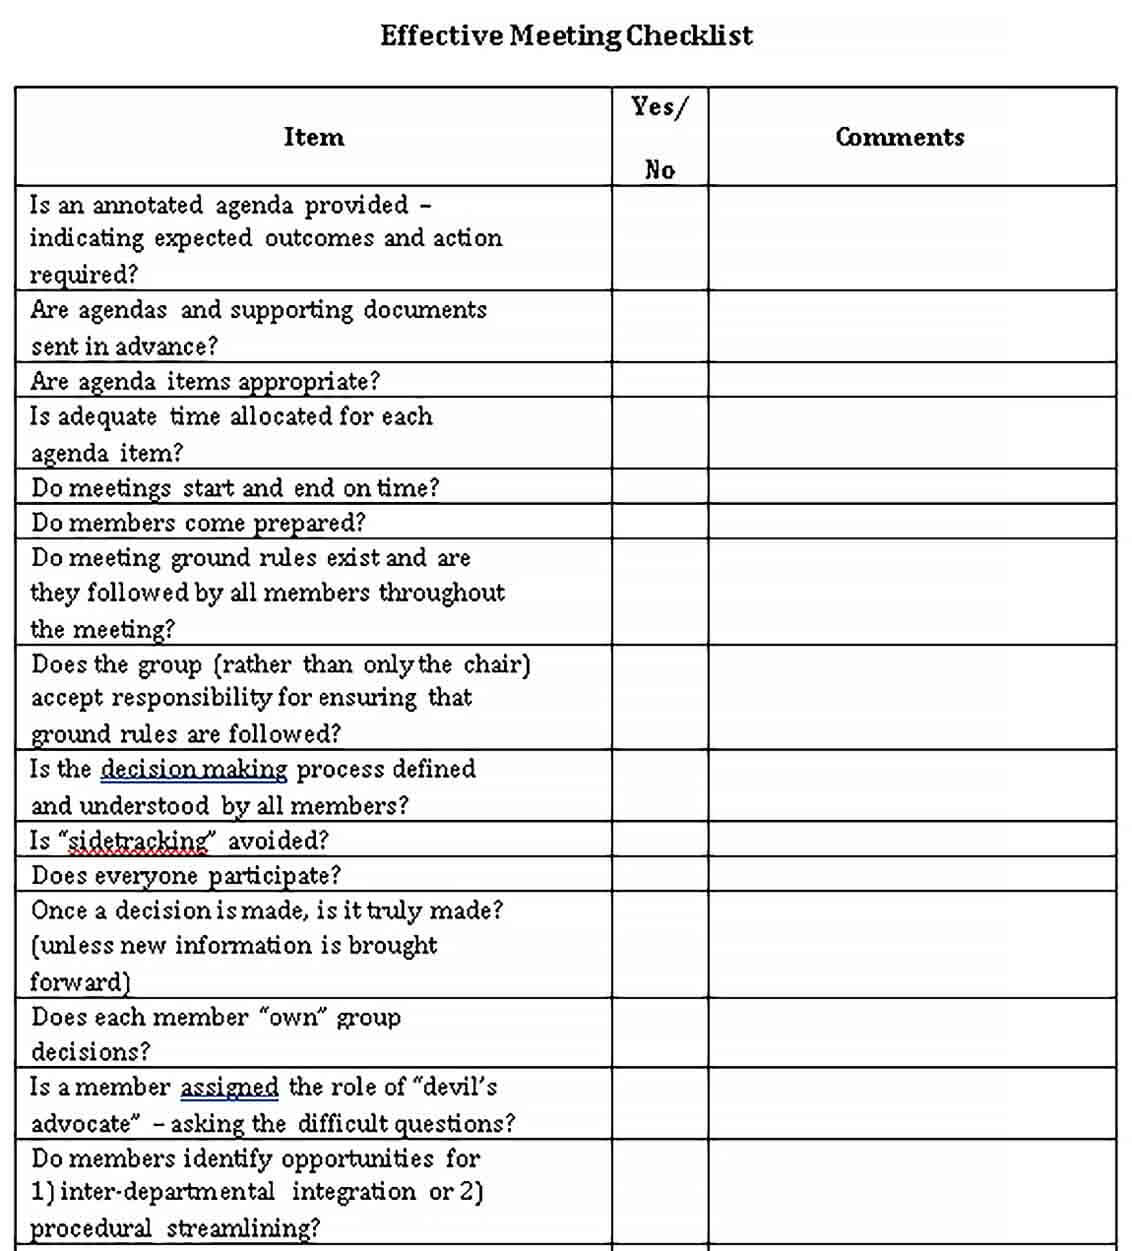 Sample Effective Meeting Checklist Template